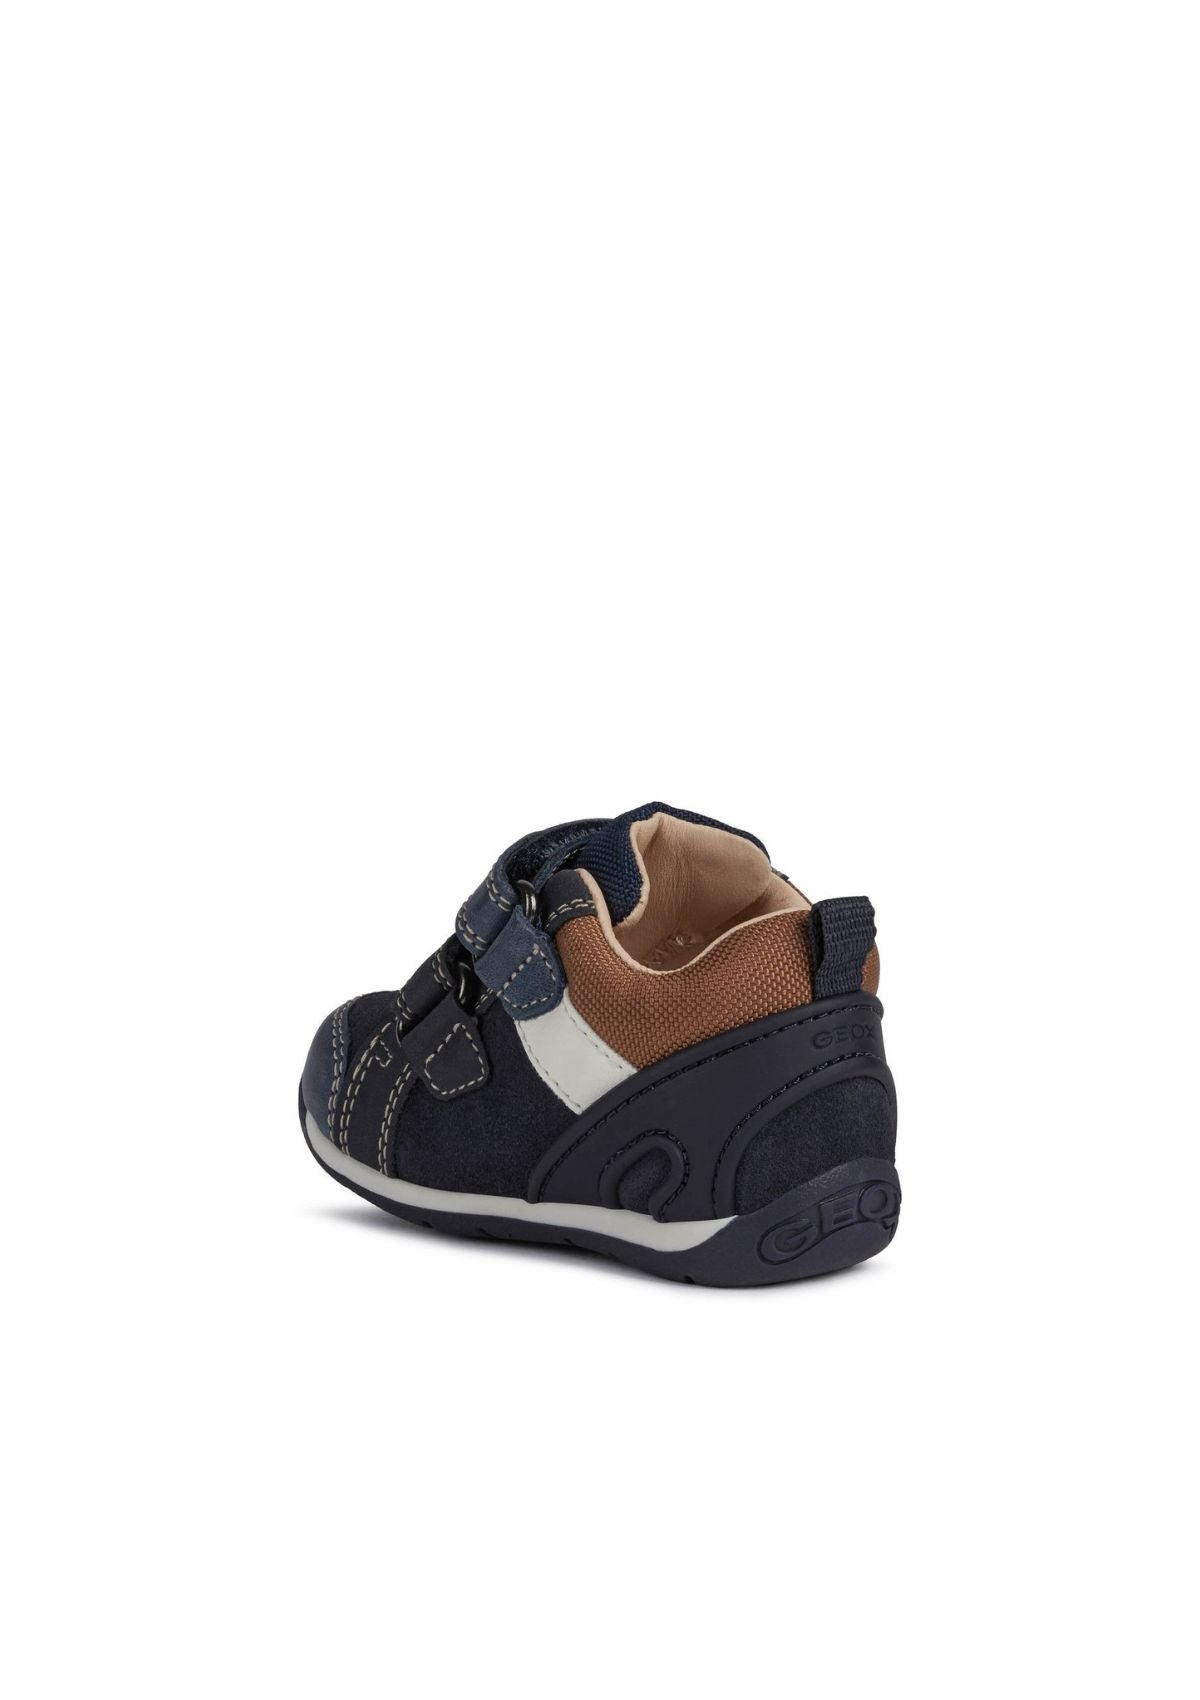 Geox Baby Boys Trainers EACH Navy Light Brown back